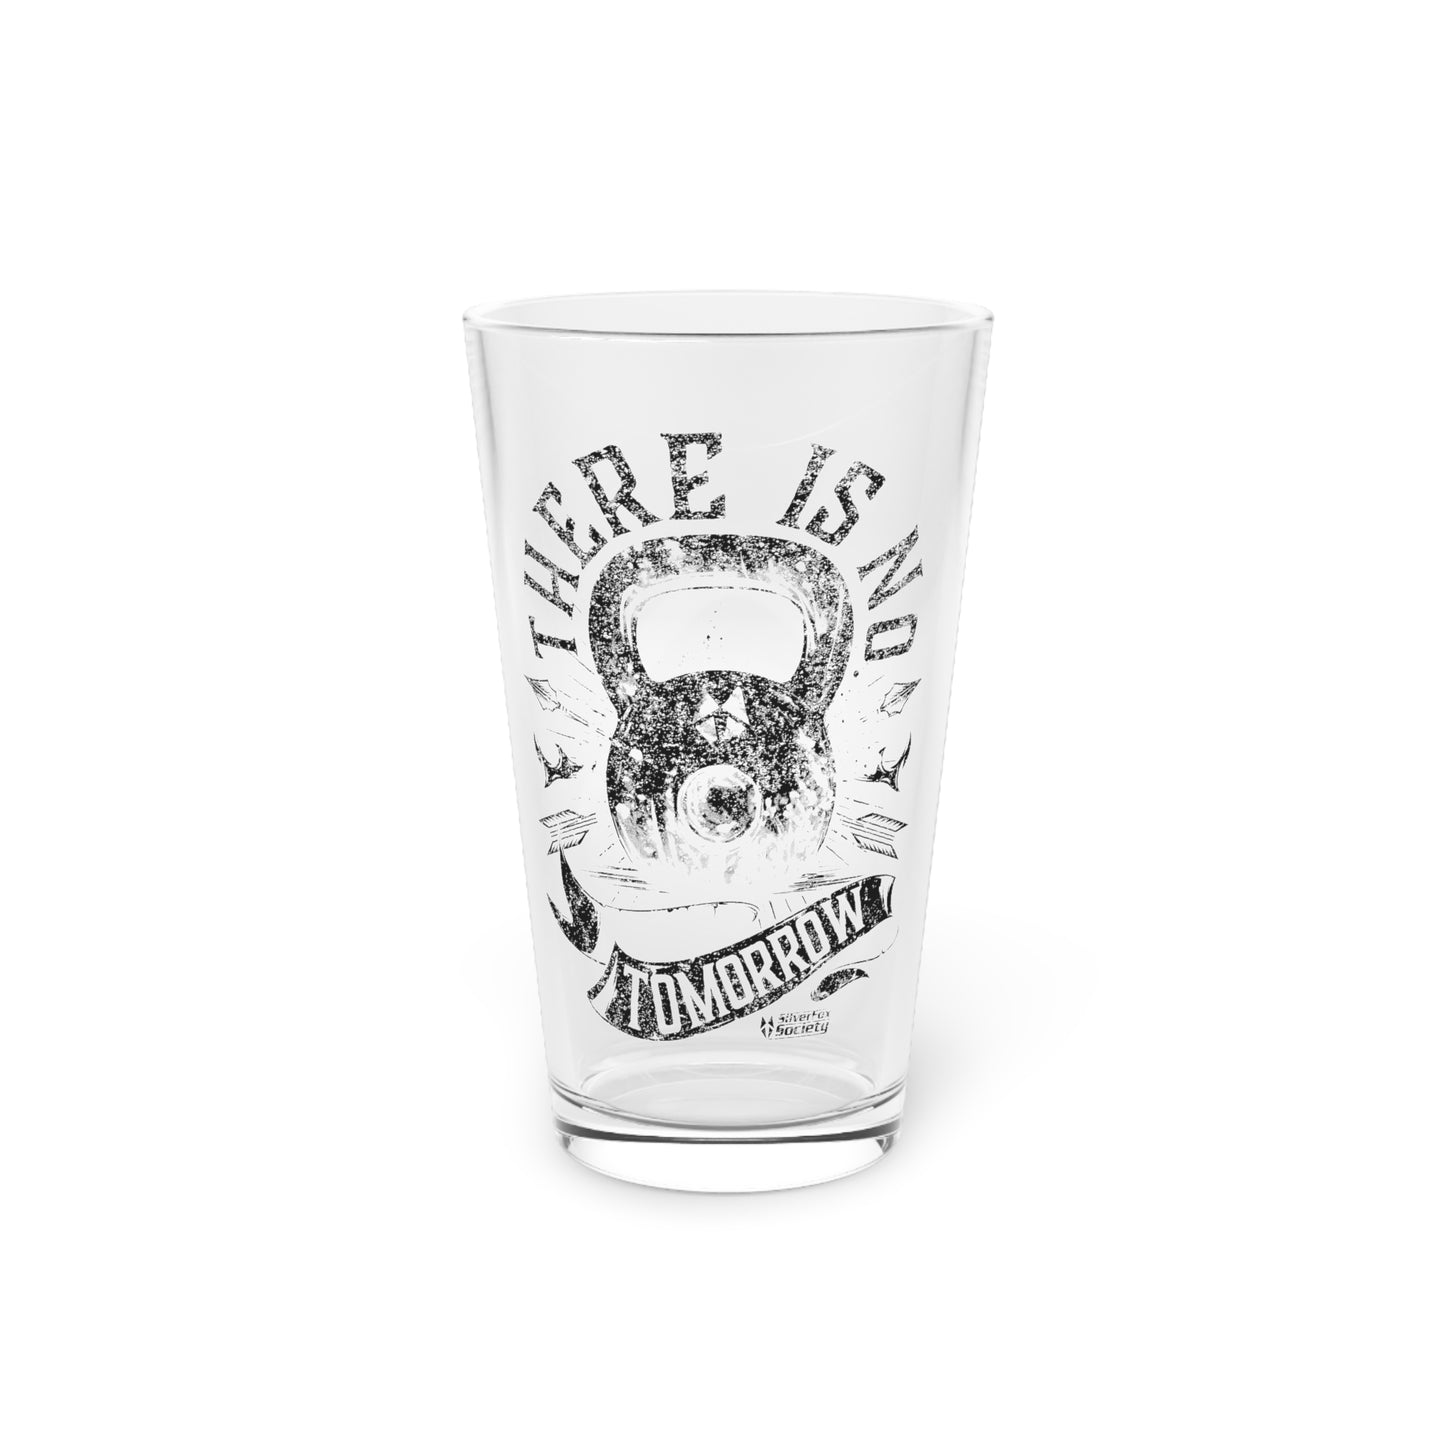 There Is No Tomorrow Pint Glass, 16oz